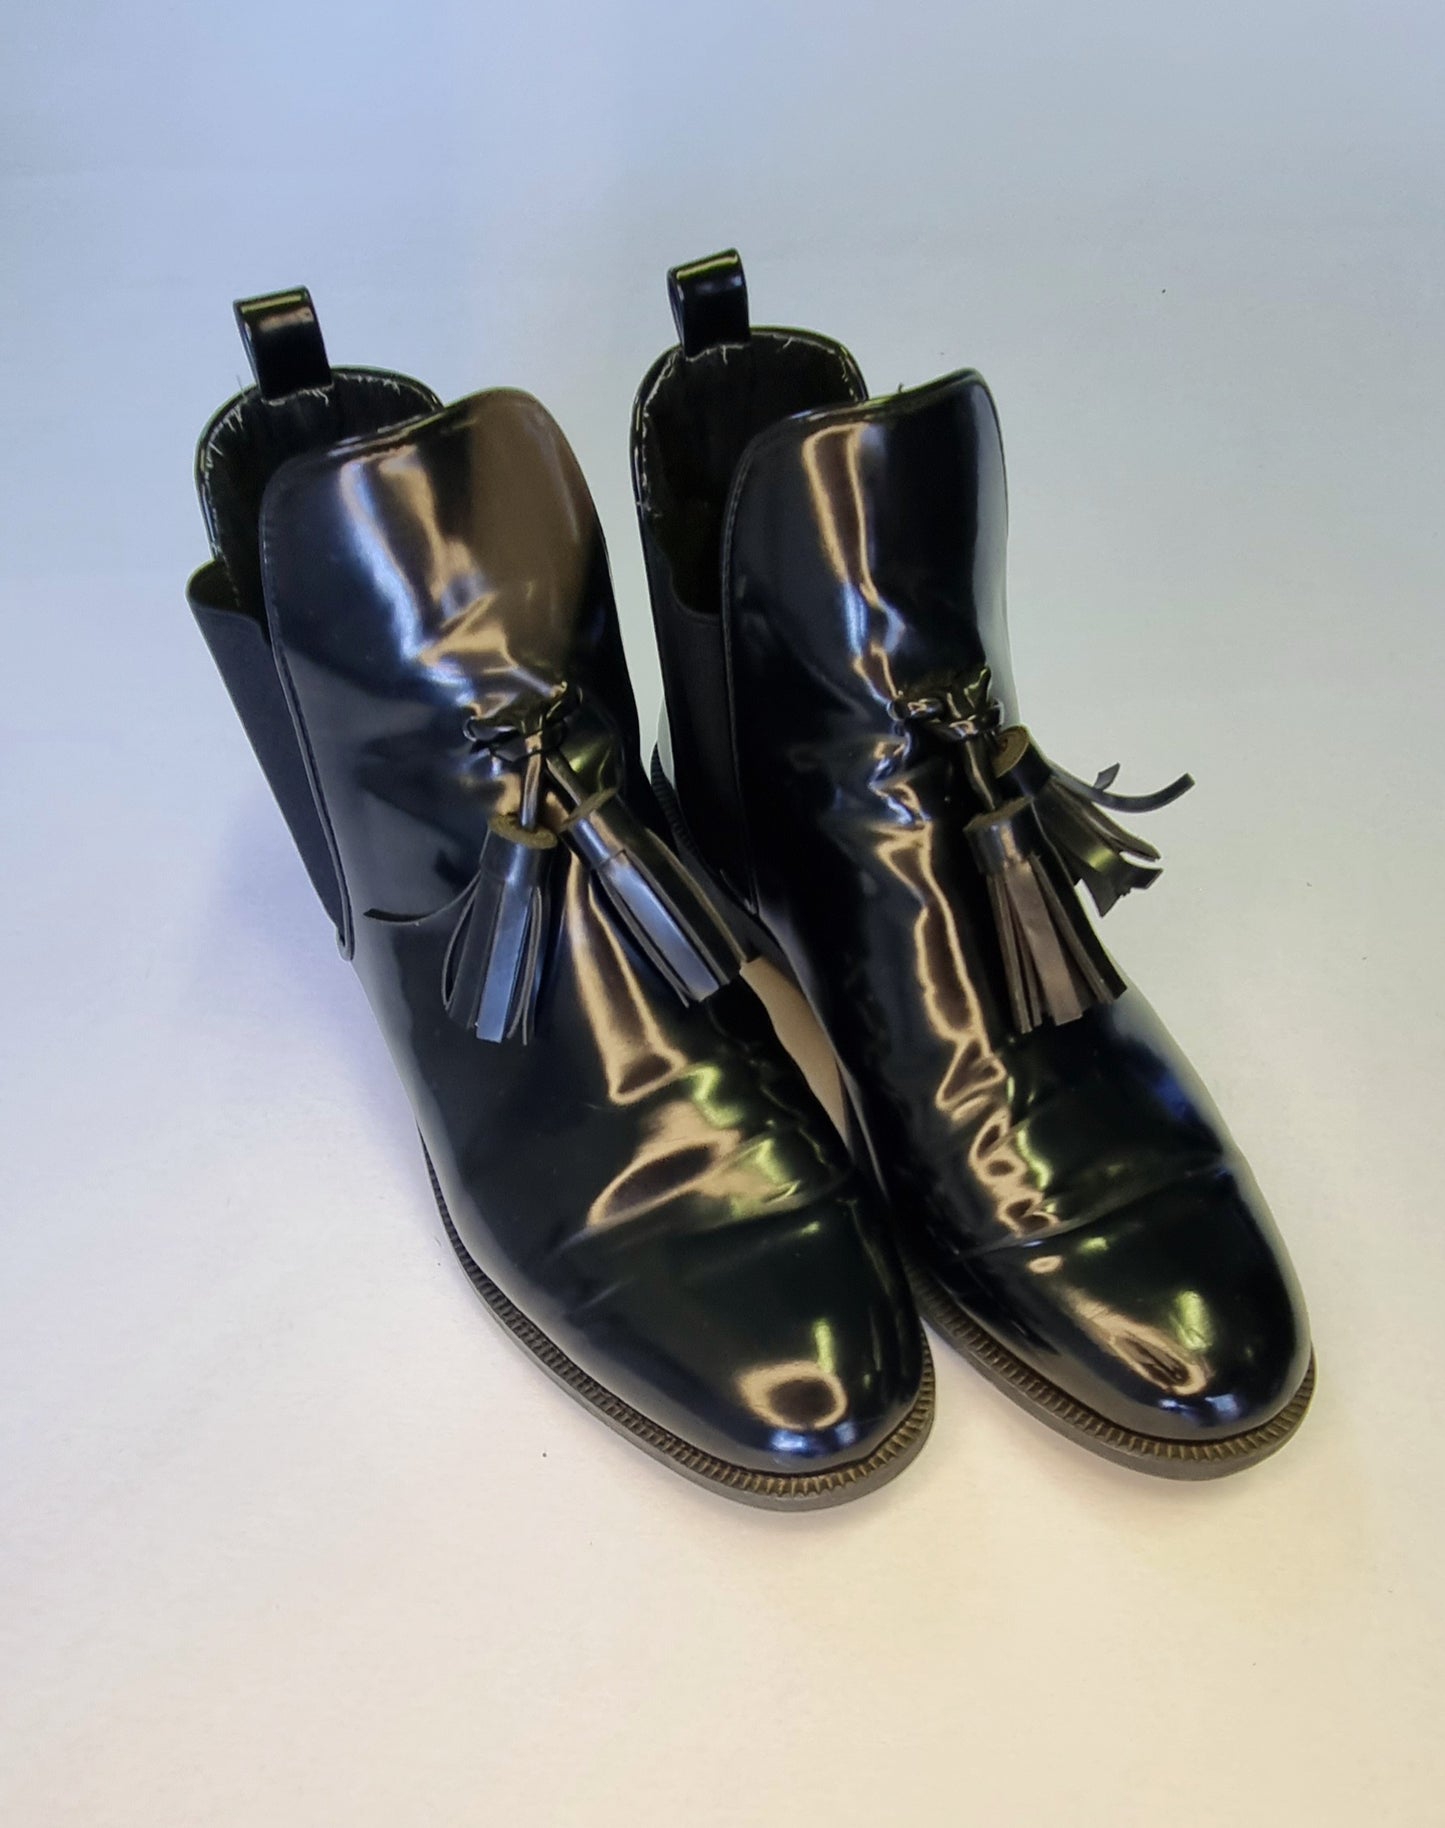 Zara Trafaluc - Black glossy patent leather slip on low heel Chelsea boots with front ties